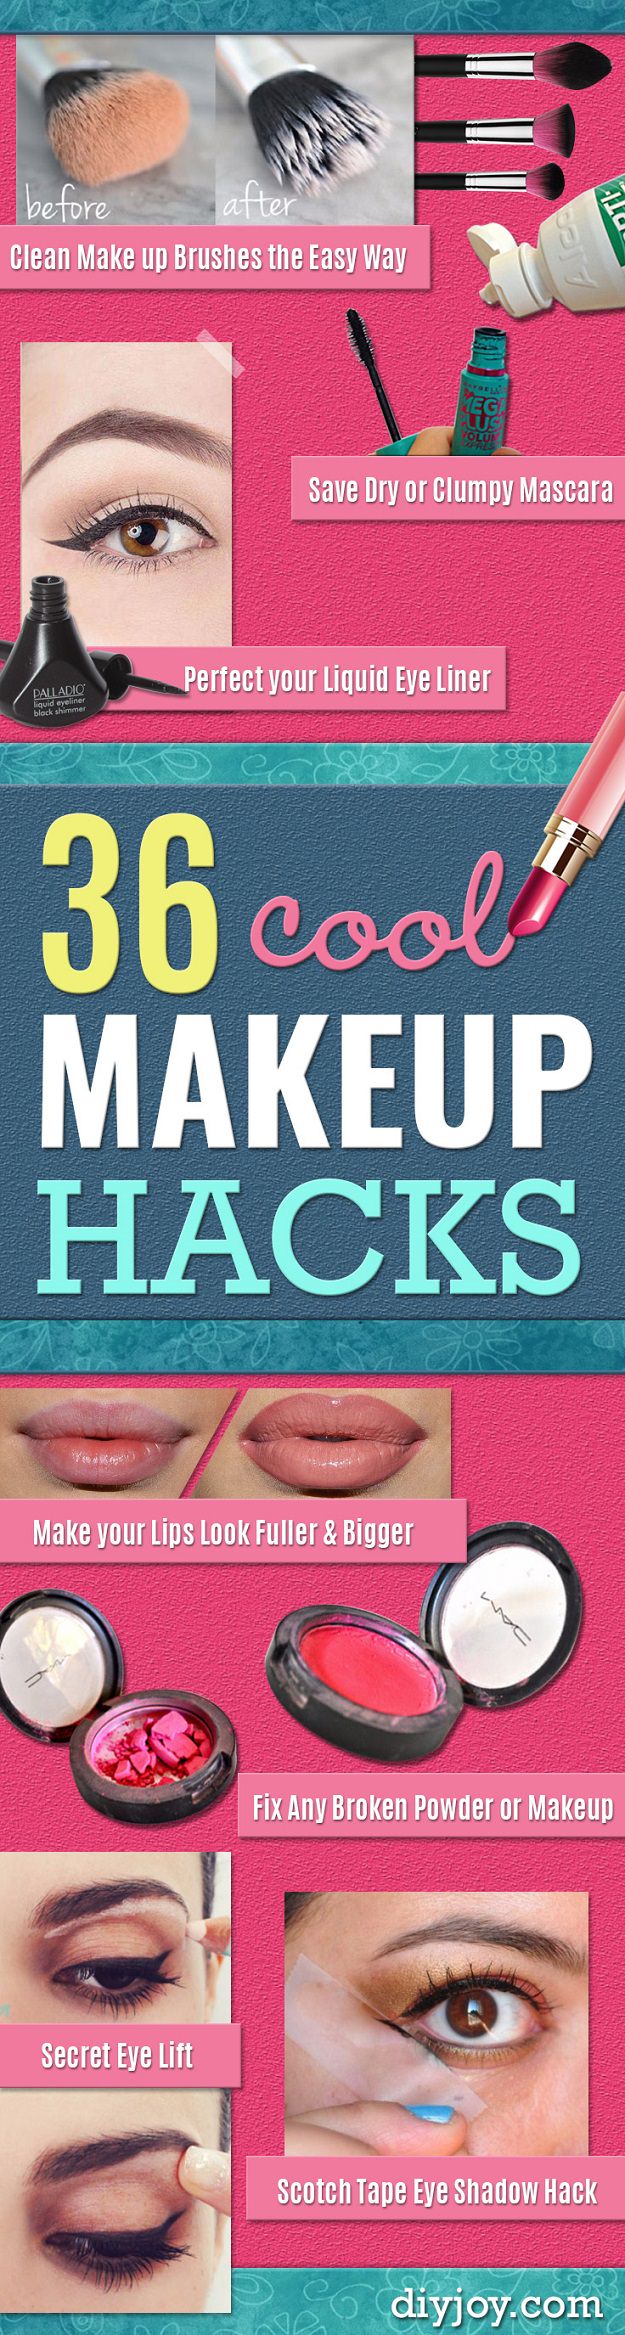 These clever makeup hacks will make you look stunning easily and in less time.